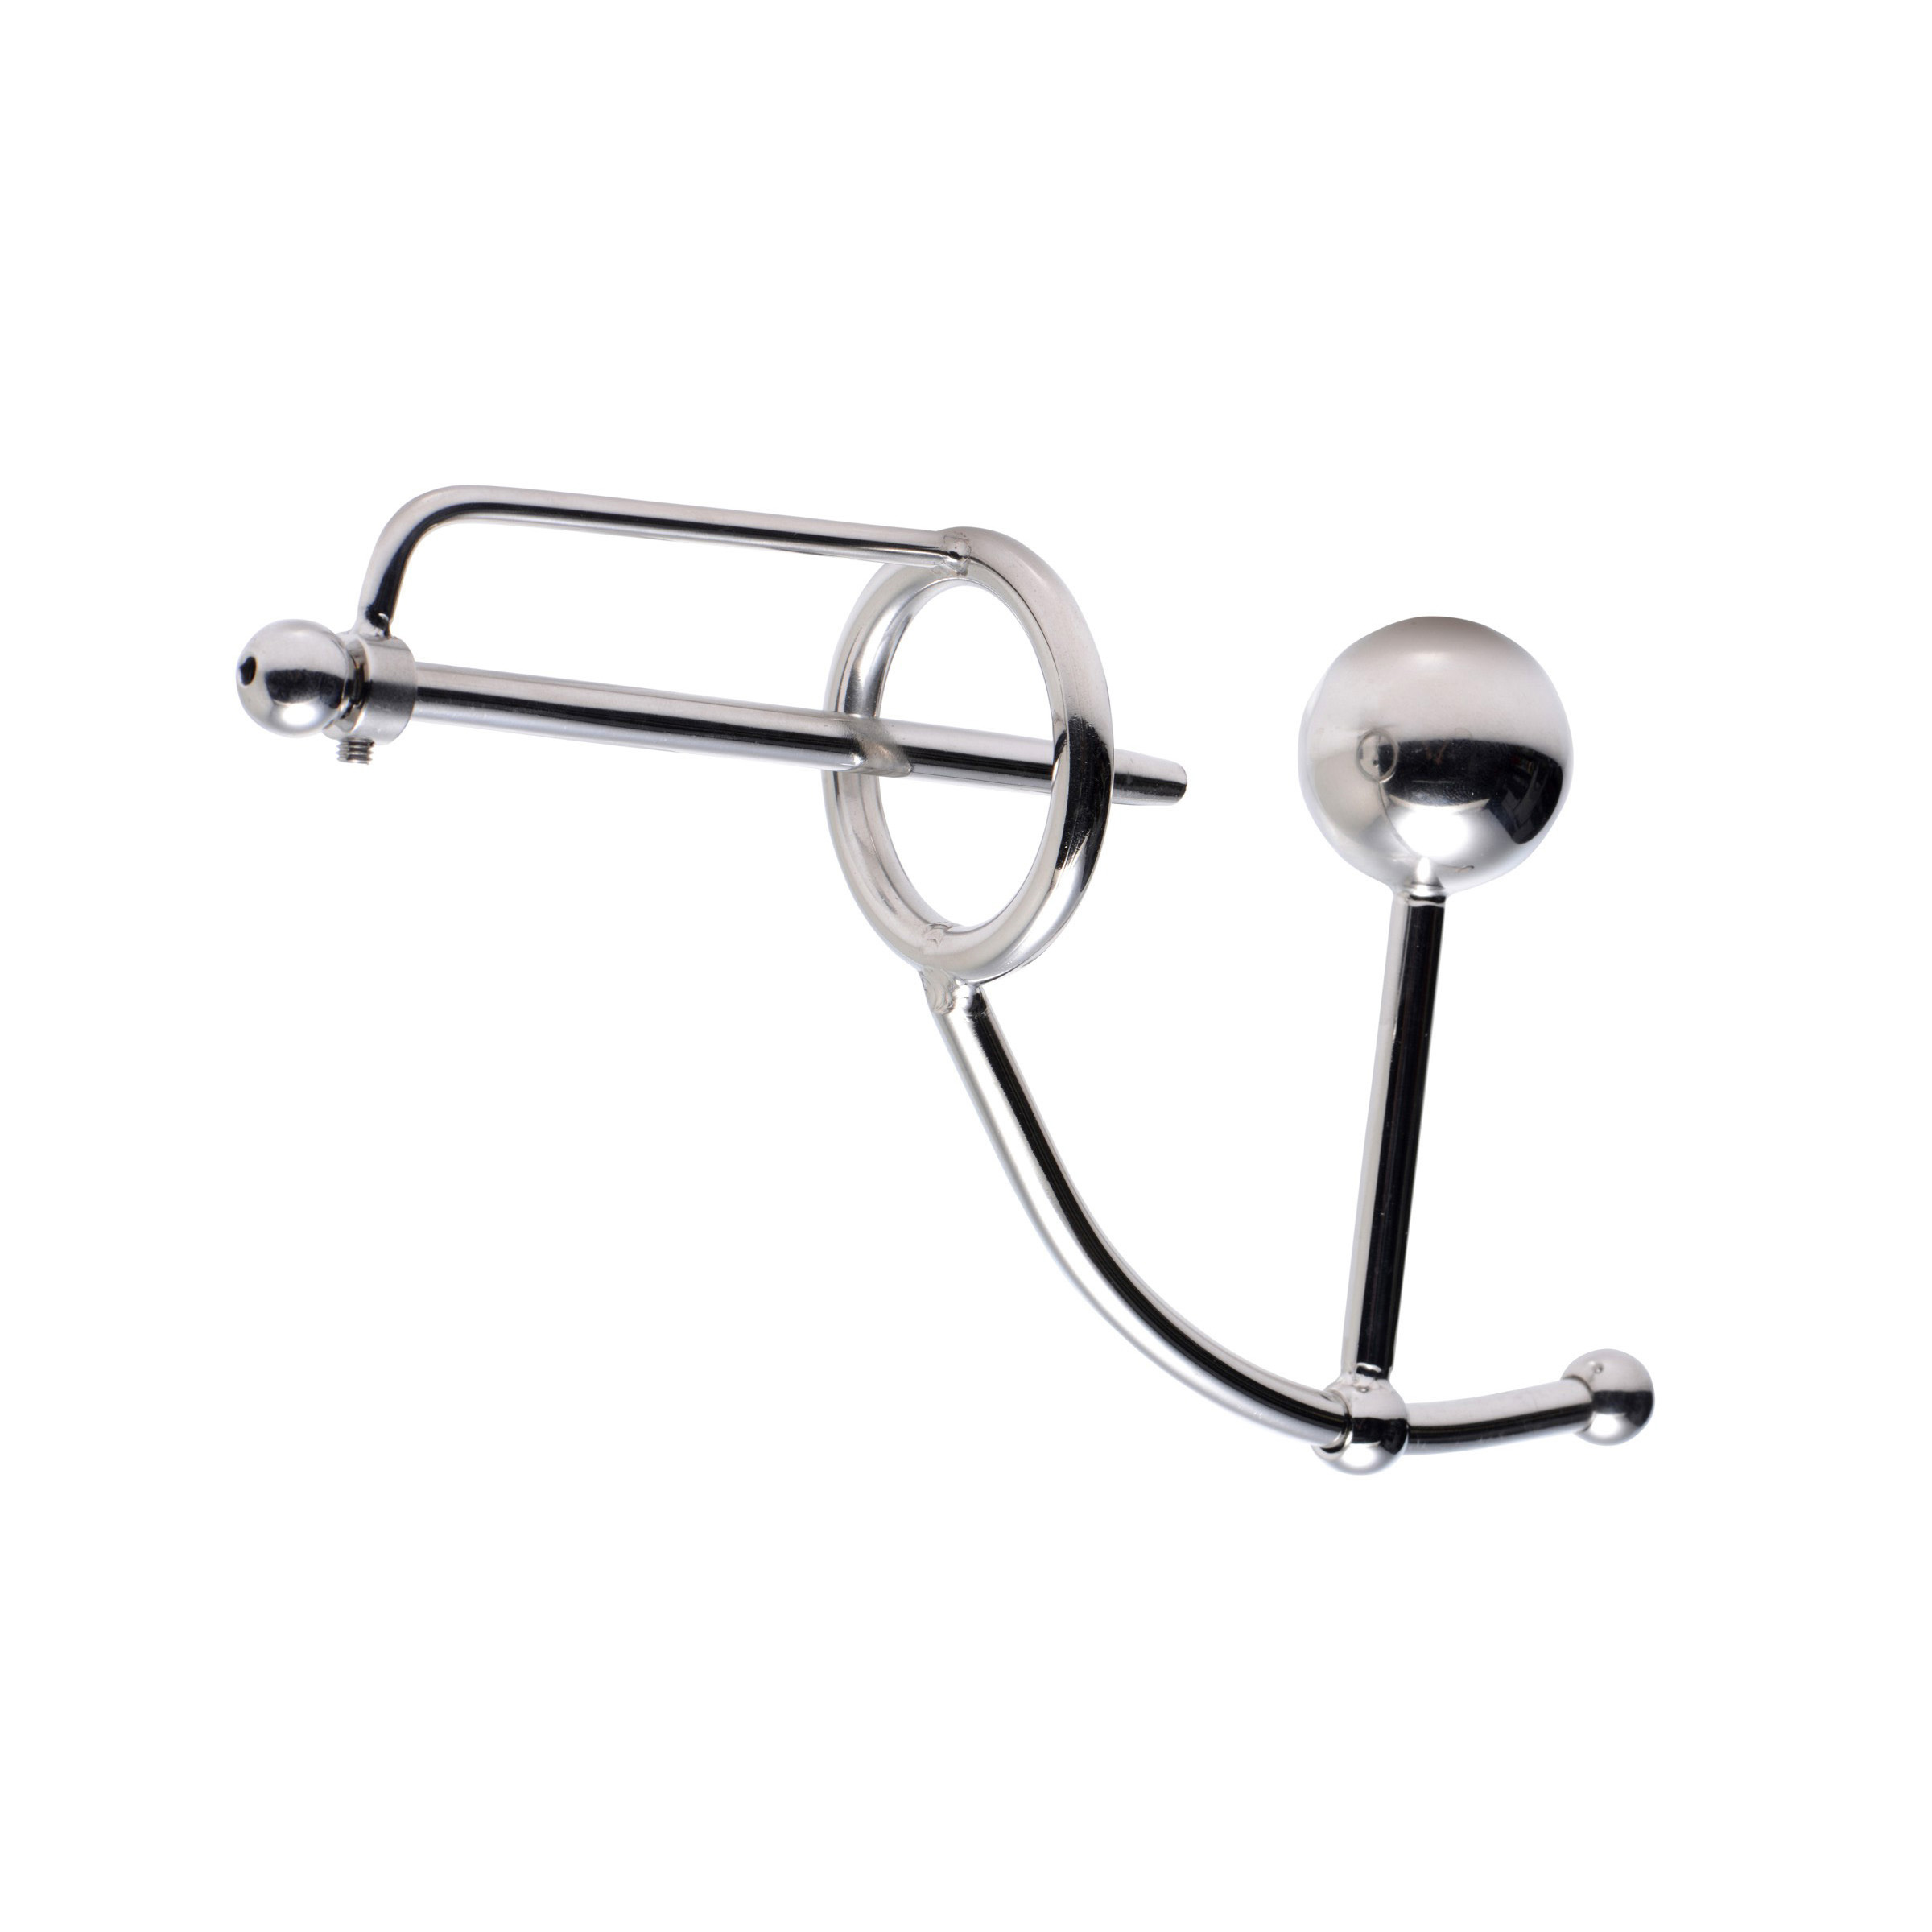 Penis Plug With Anal Intruder Cock Ring - Sliding Anal Intruder and Urethral Insert: Sex Toy Distributing